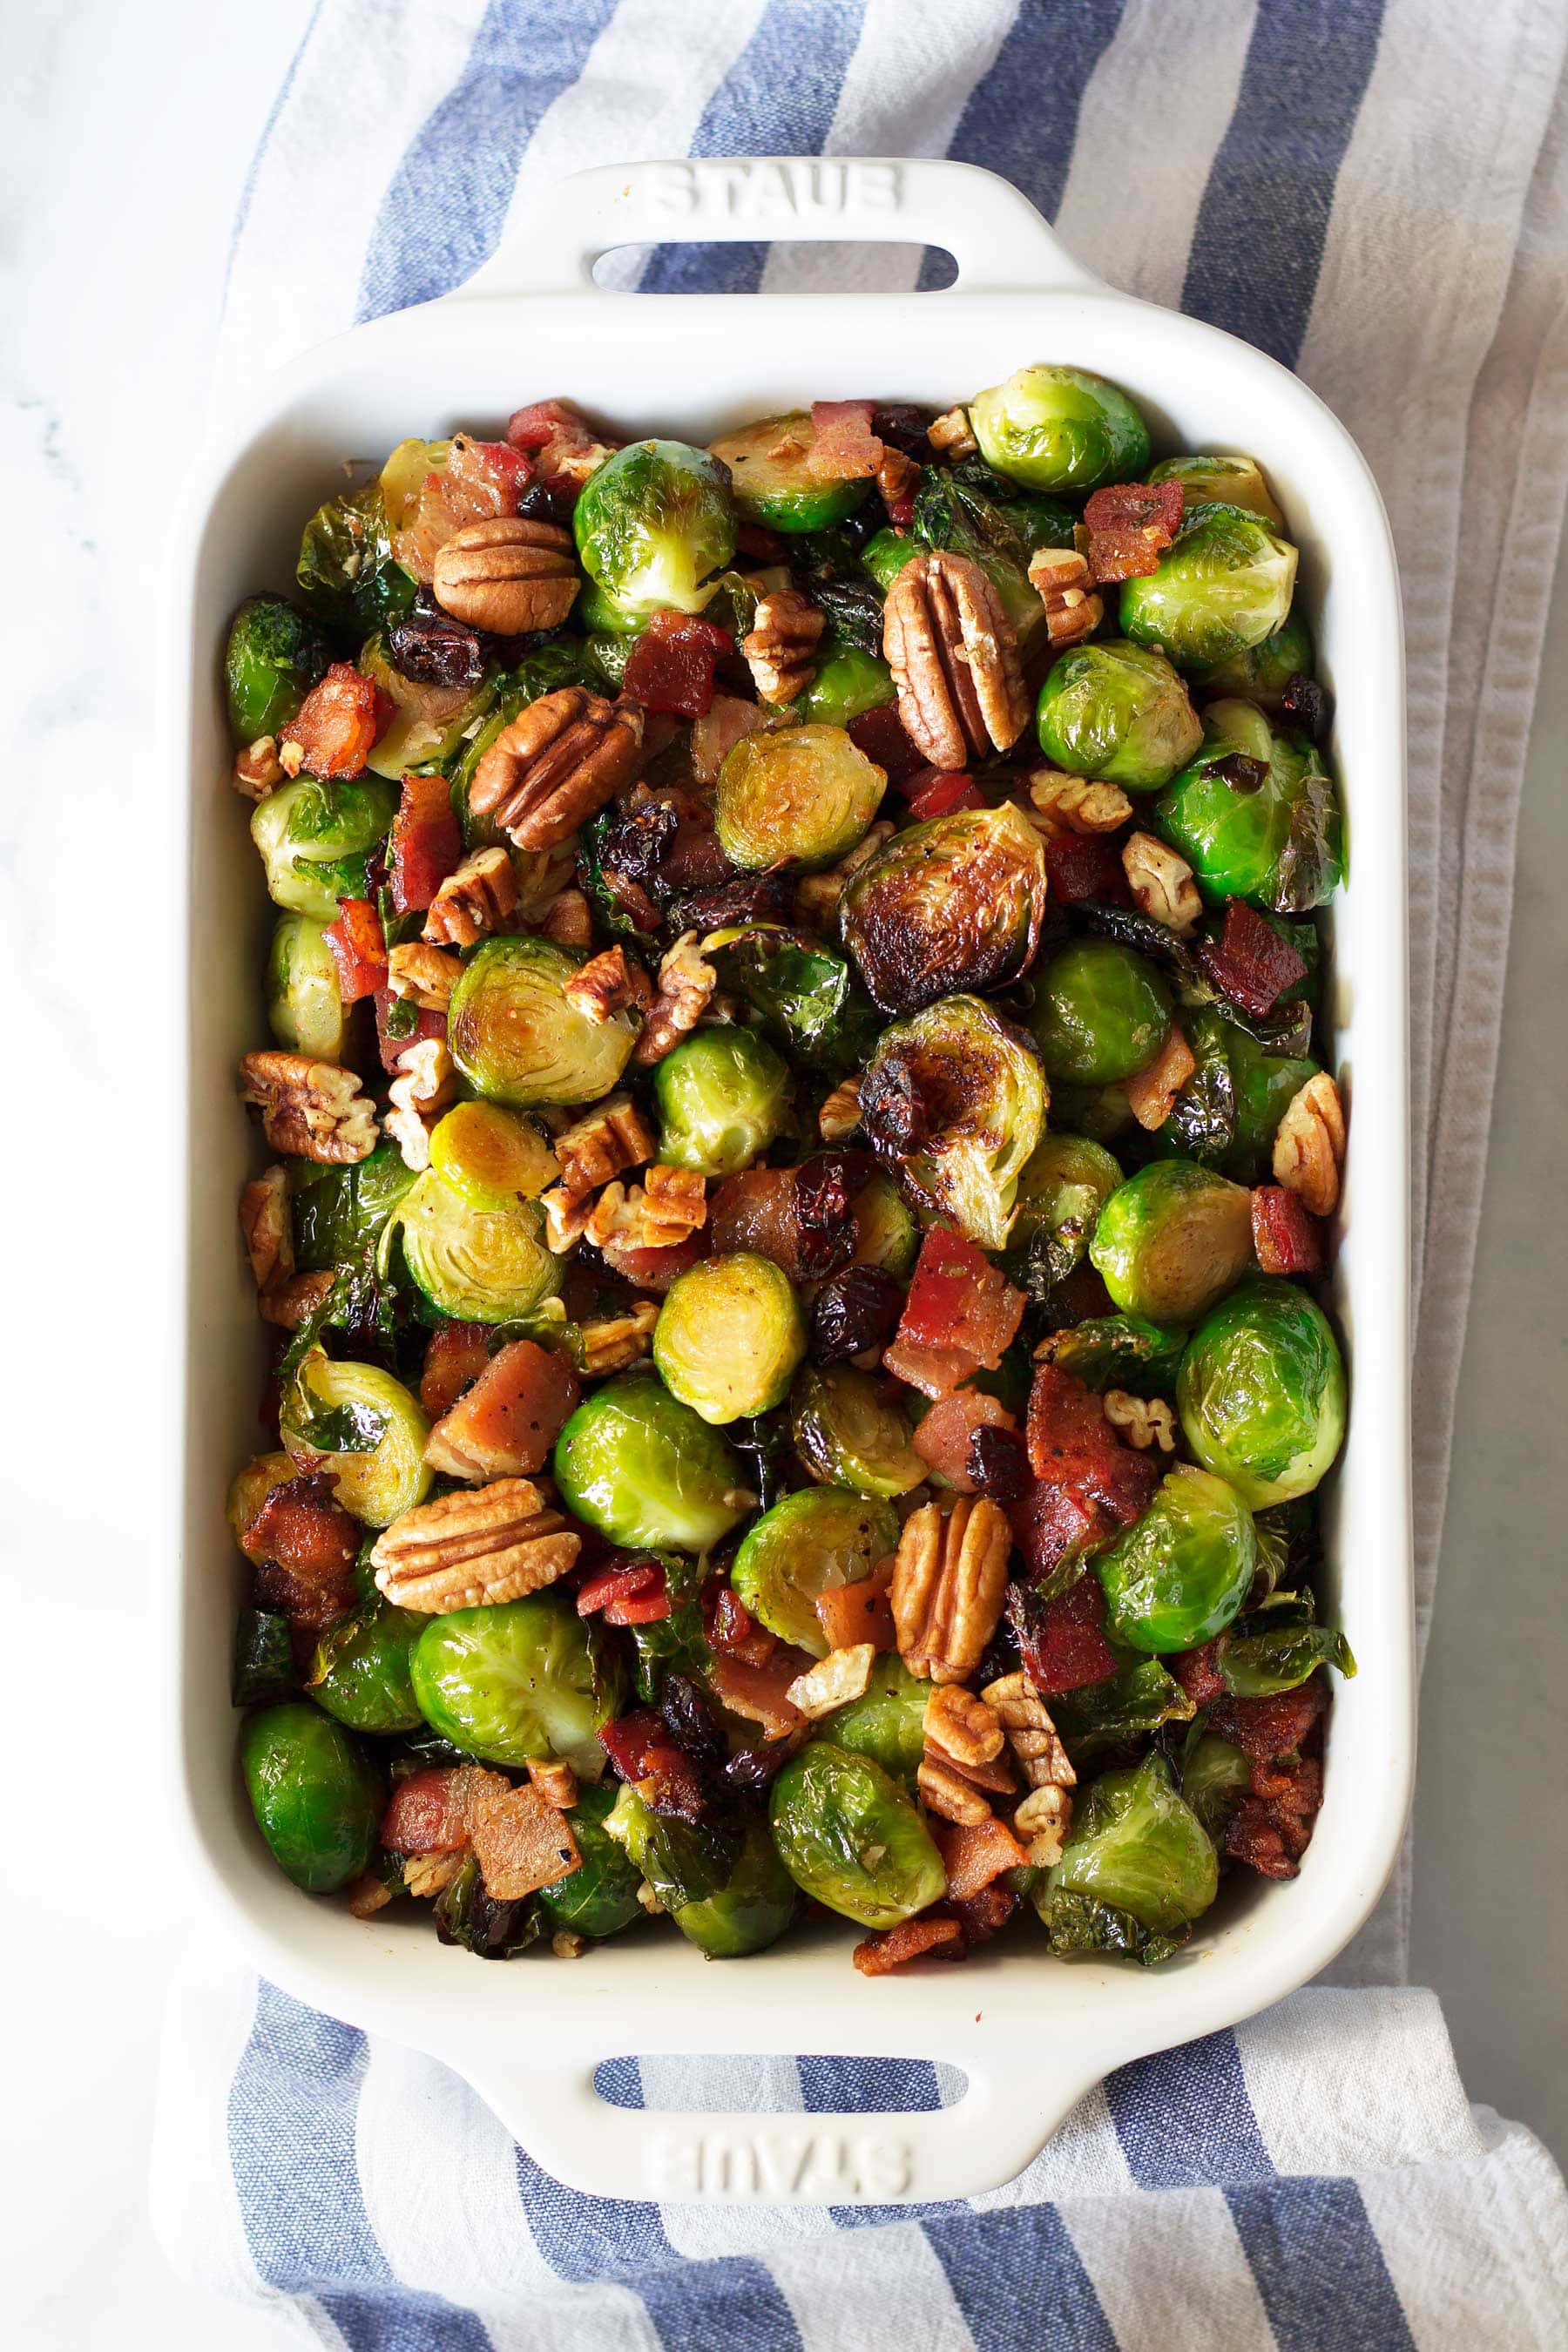 This quick holiday side dish is perfect for Thanksgiving and Christmas! These Maple Bacon Brussels Sprouts with Pecans and Cranberries are sure to be a hit on your holiday table. This paleo Thanksgiving recipe is also gluten free, dairy free, and can be made low carb and keto! #thanksgivingsidedish #healthythanksgiving #healthychristmas #brusselssprouts #bacon #maplesyrup #lakanto #cranberries #crasins #pecans #glutenfreethanksgiving #glutenfree #dairyfree #ketothanksgiving #ketochristmas #ketosidedish